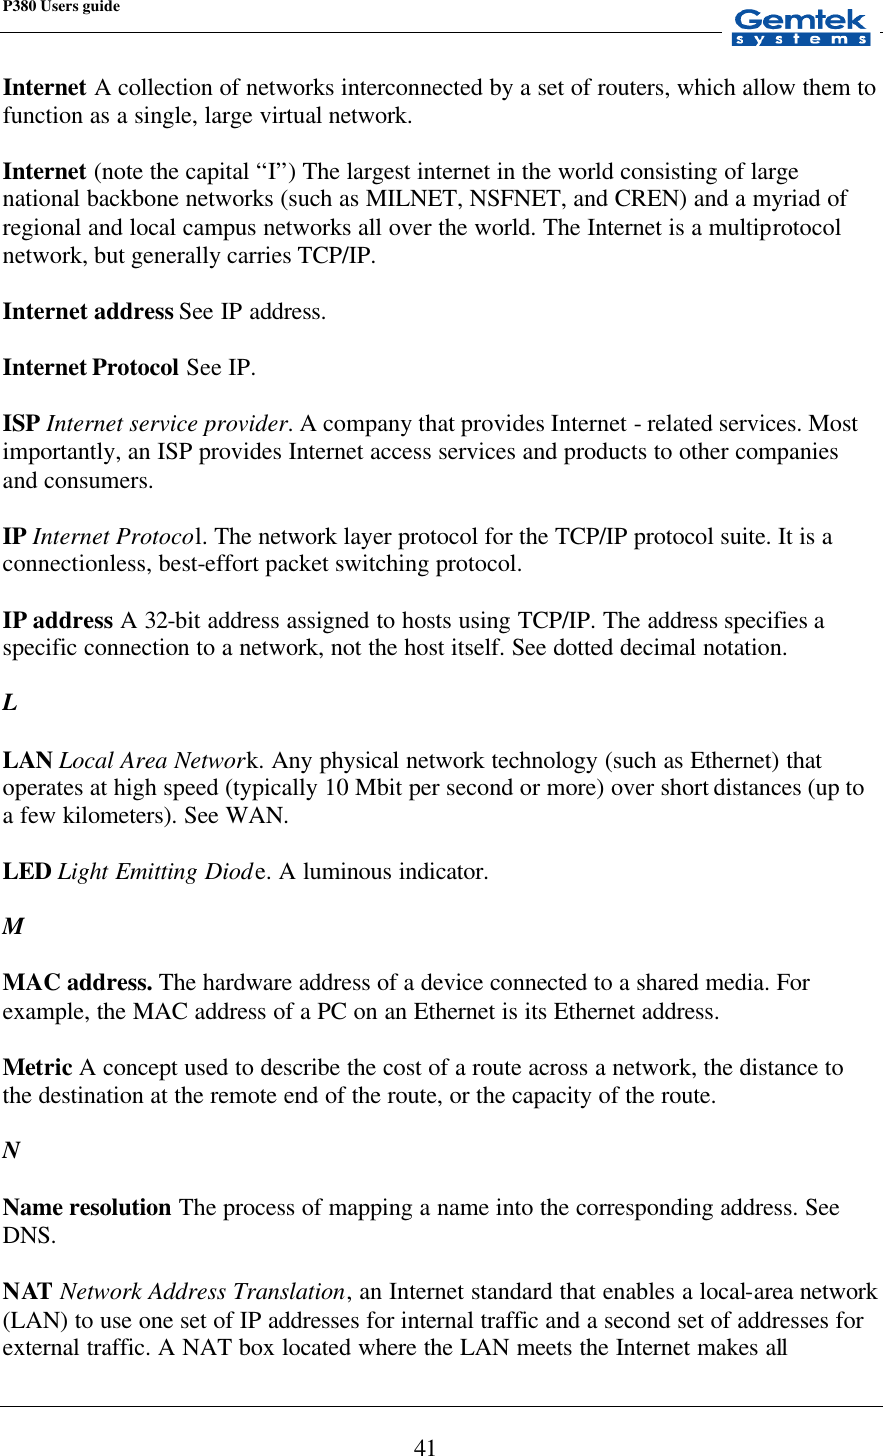 P380 Users guide            41 Internet A collection of networks interconnected by a set of routers, which allow them to function as a single, large virtual network.  Internet (note the capital “I”) The largest internet in the world consisting of large national backbone networks (such as MILNET, NSFNET, and CREN) and a myriad of regional and local campus networks all over the world. The Internet is a multiprotocol network, but generally carries TCP/IP.  Internet address See IP address.  Internet Protocol See IP.  ISP Internet service provider. A company that provides Internet - related services. Most importantly, an ISP provides Internet access services and products to other companies and consumers.  IP Internet Protocol. The network layer protocol for the TCP/IP protocol suite. It is a connectionless, best-effort packet switching protocol.  IP address A 32-bit address assigned to hosts using TCP/IP. The address specifies a specific connection to a network, not the host itself. See dotted decimal notation.  L  LAN Local Area Network. Any physical network technology (such as Ethernet) that operates at high speed (typically 10 Mbit per second or more) over short distances (up to a few kilometers). See WAN.  LED Light Emitting Diode. A luminous indicator.  M  MAC address. The hardware address of a device connected to a shared media. For example, the MAC address of a PC on an Ethernet is its Ethernet address.   Metric A concept used to describe the cost of a route across a network, the distance to the destination at the remote end of the route, or the capacity of the route.  N  Name resolution The process of mapping a name into the corresponding address. See DNS.  NAT Network Address Translation, an Internet standard that enables a local-area network (LAN) to use one set of IP addresses for internal traffic and a second set of addresses for external traffic. A NAT box located where the LAN meets the Internet makes all 